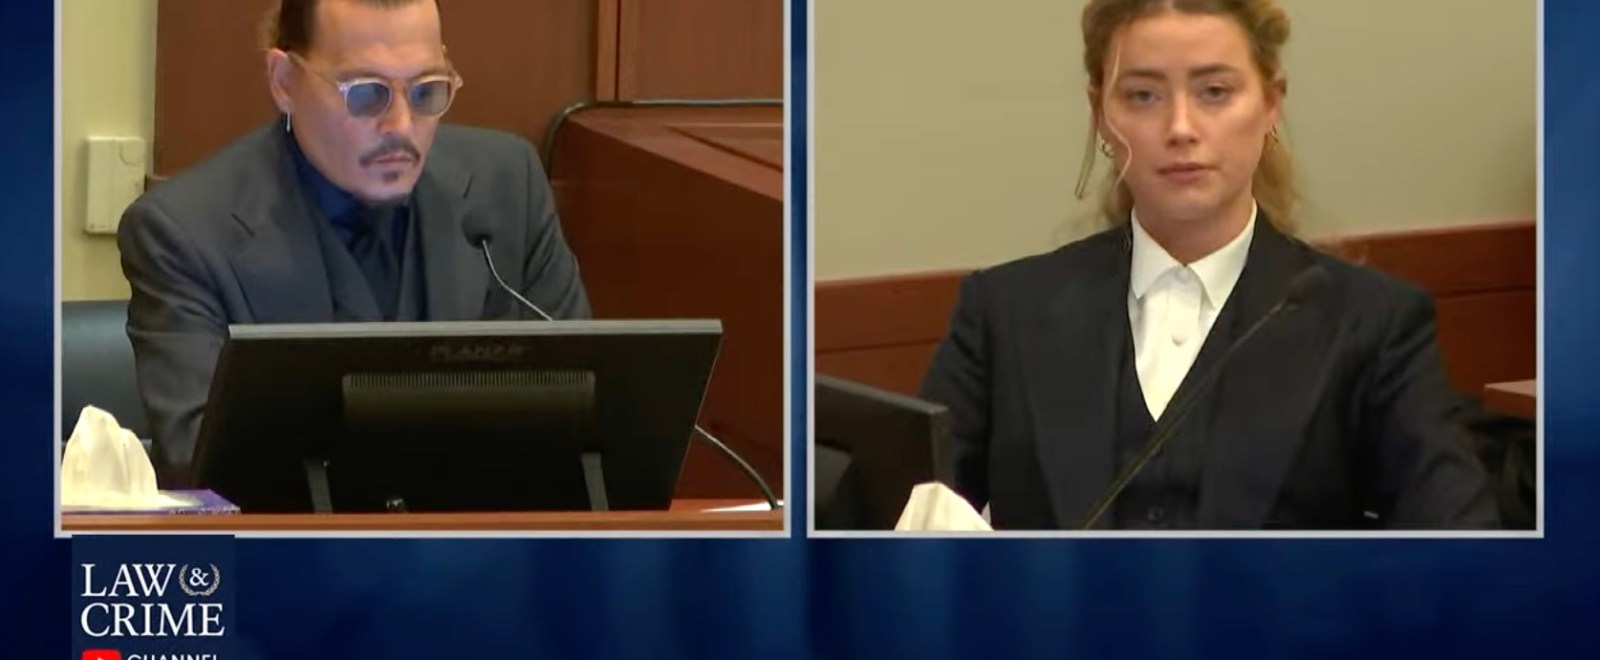 Johnny Depp and Amber Heard trial